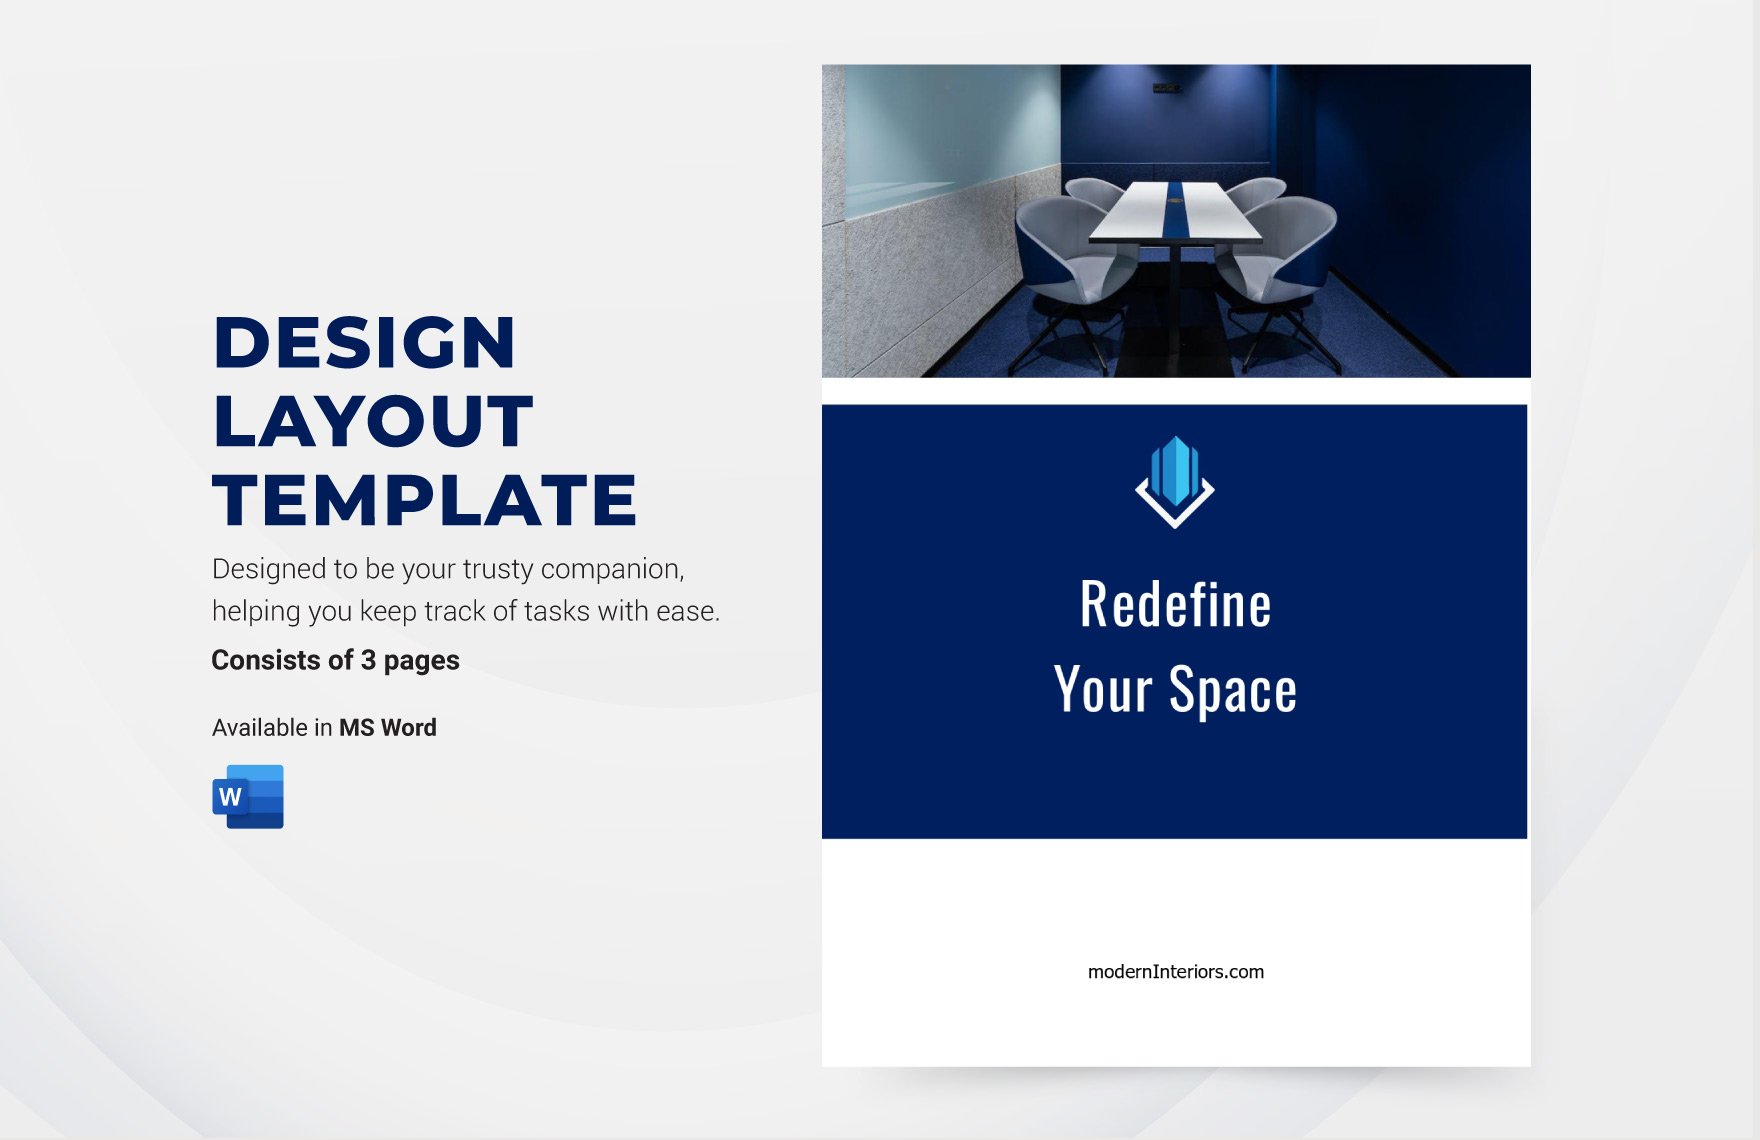 Design Layout Template